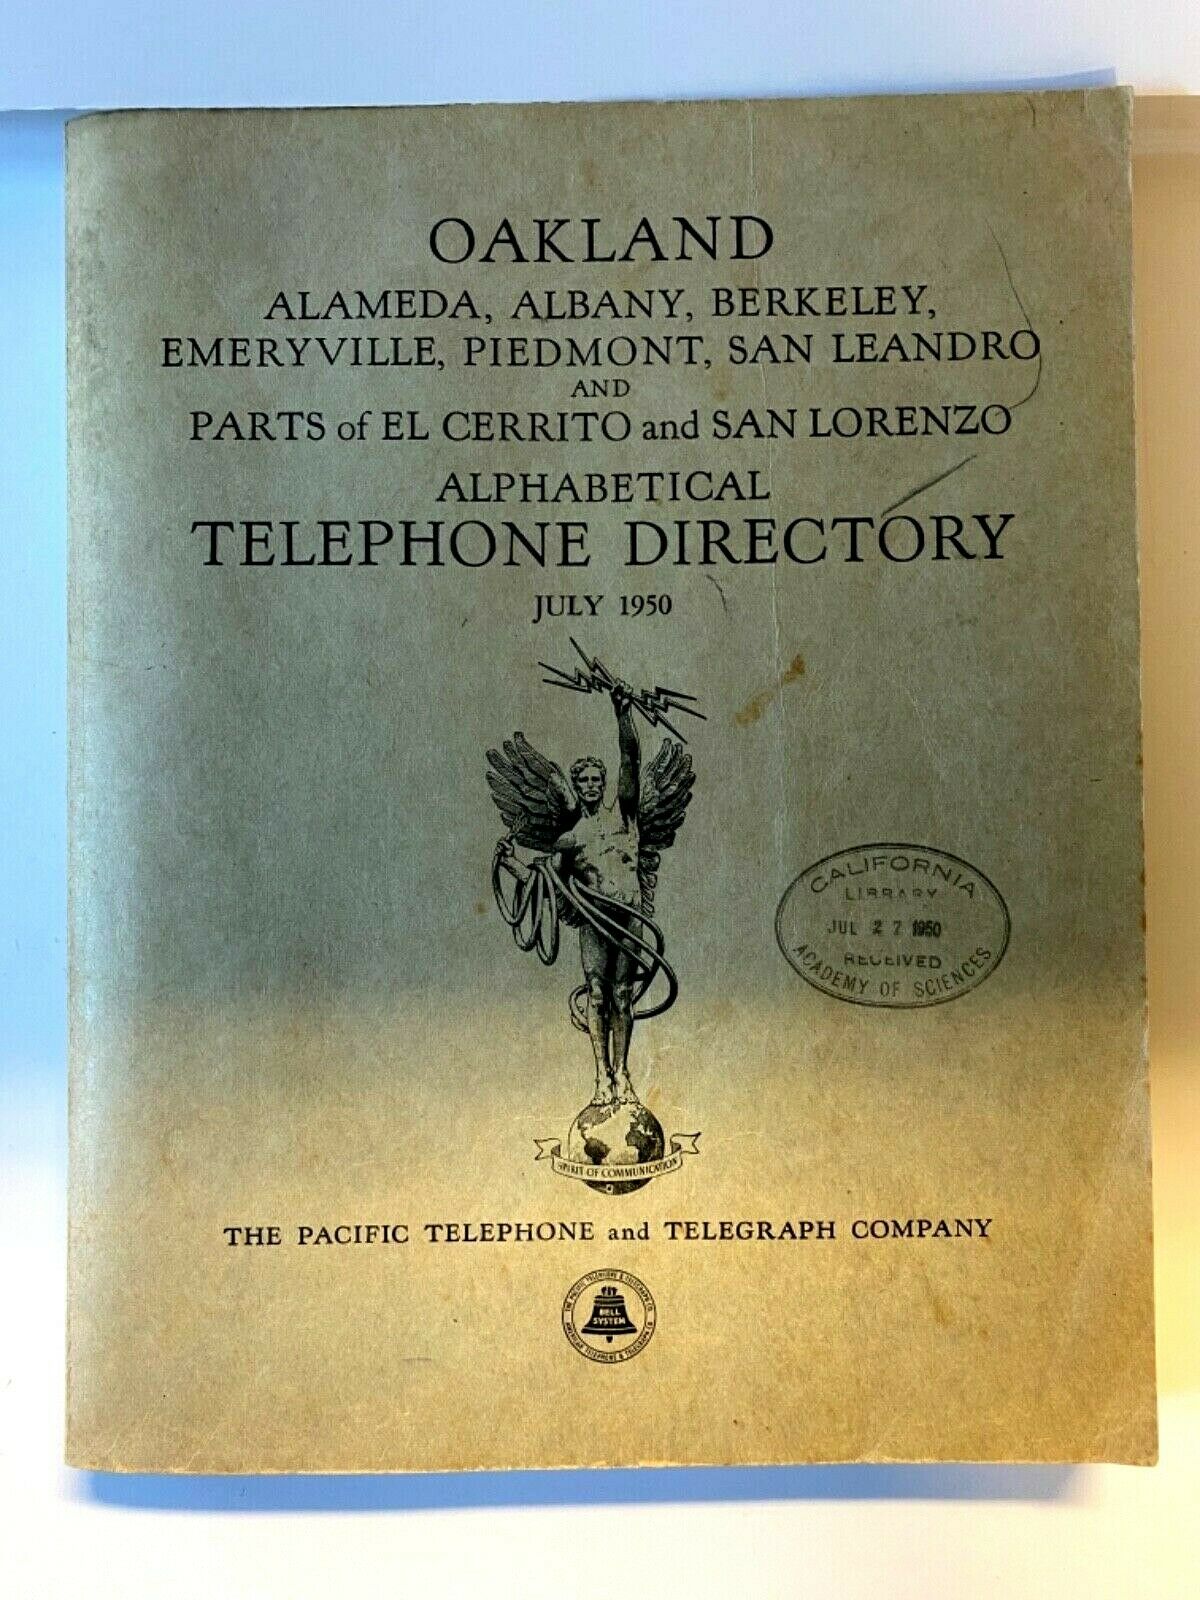 Vintage Oakland California Telephone Book Directory; Genealogy & Research; 1950